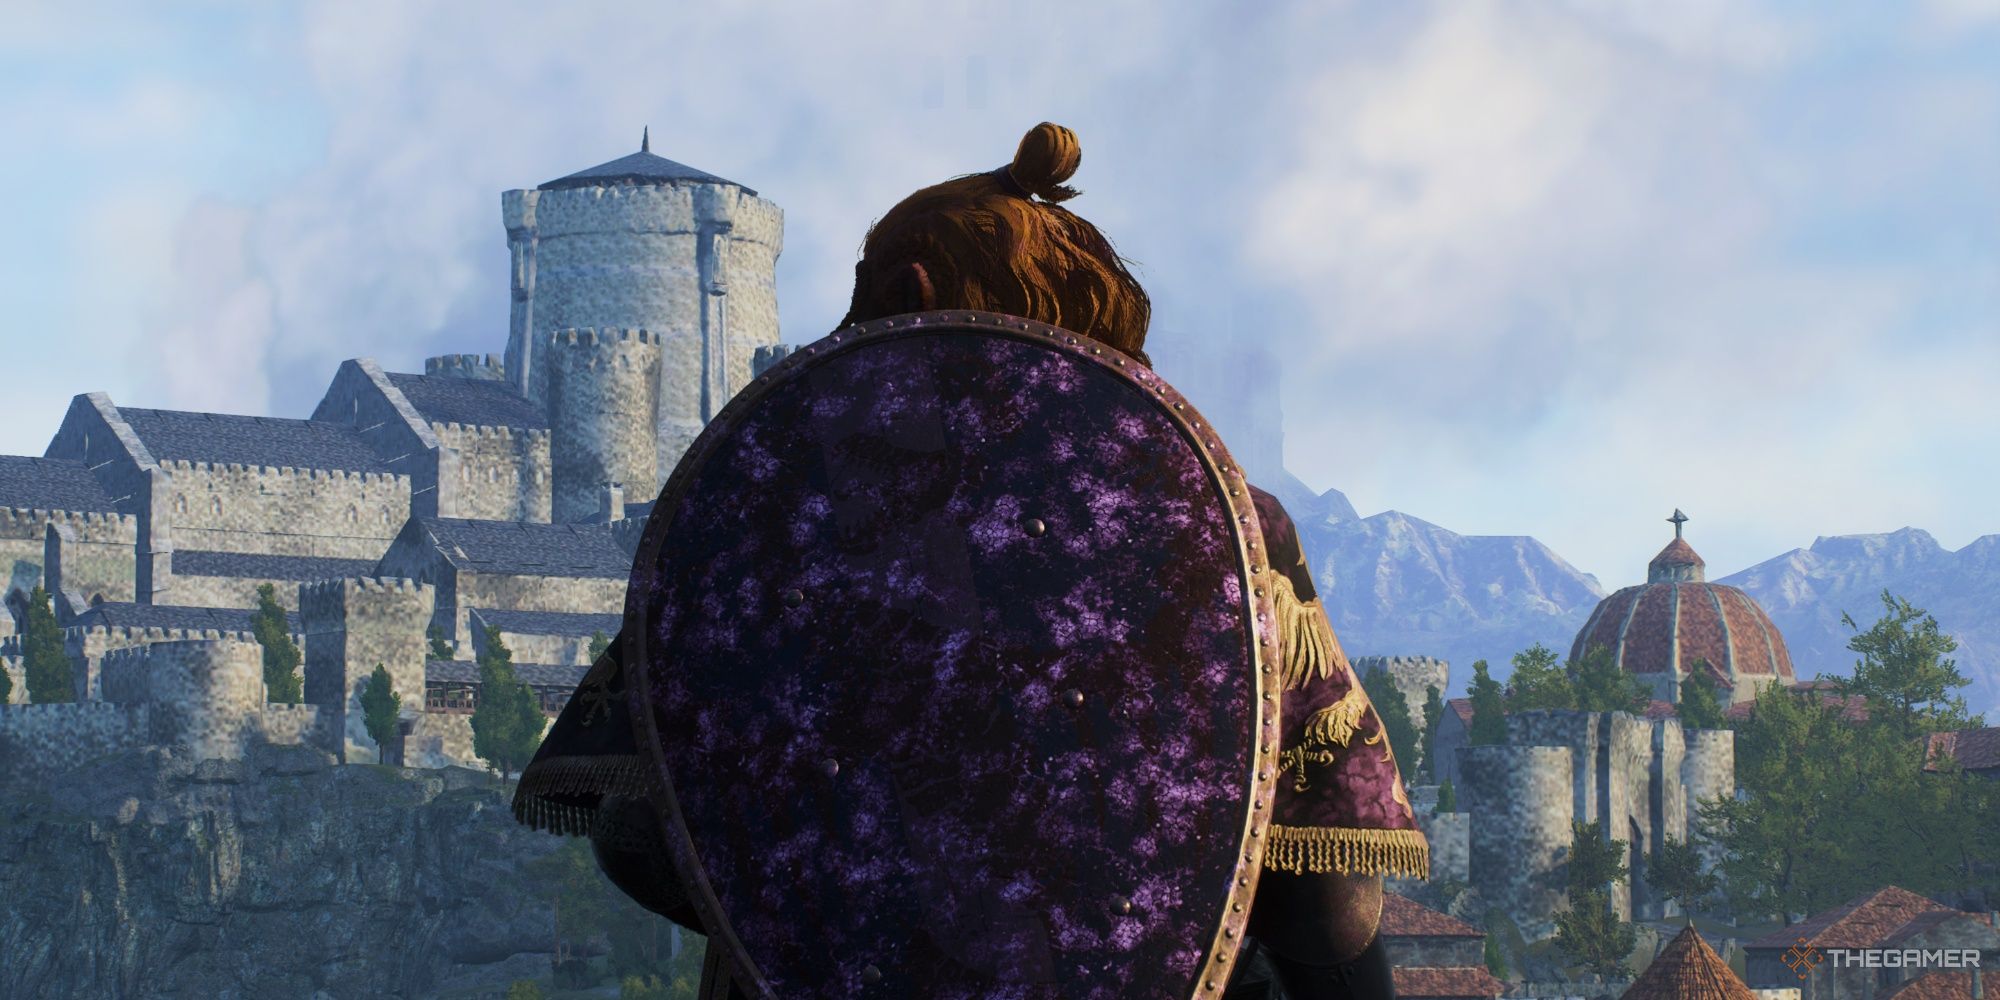 The charachter standing in Dragon's Dogma 2 watching the castle from afar